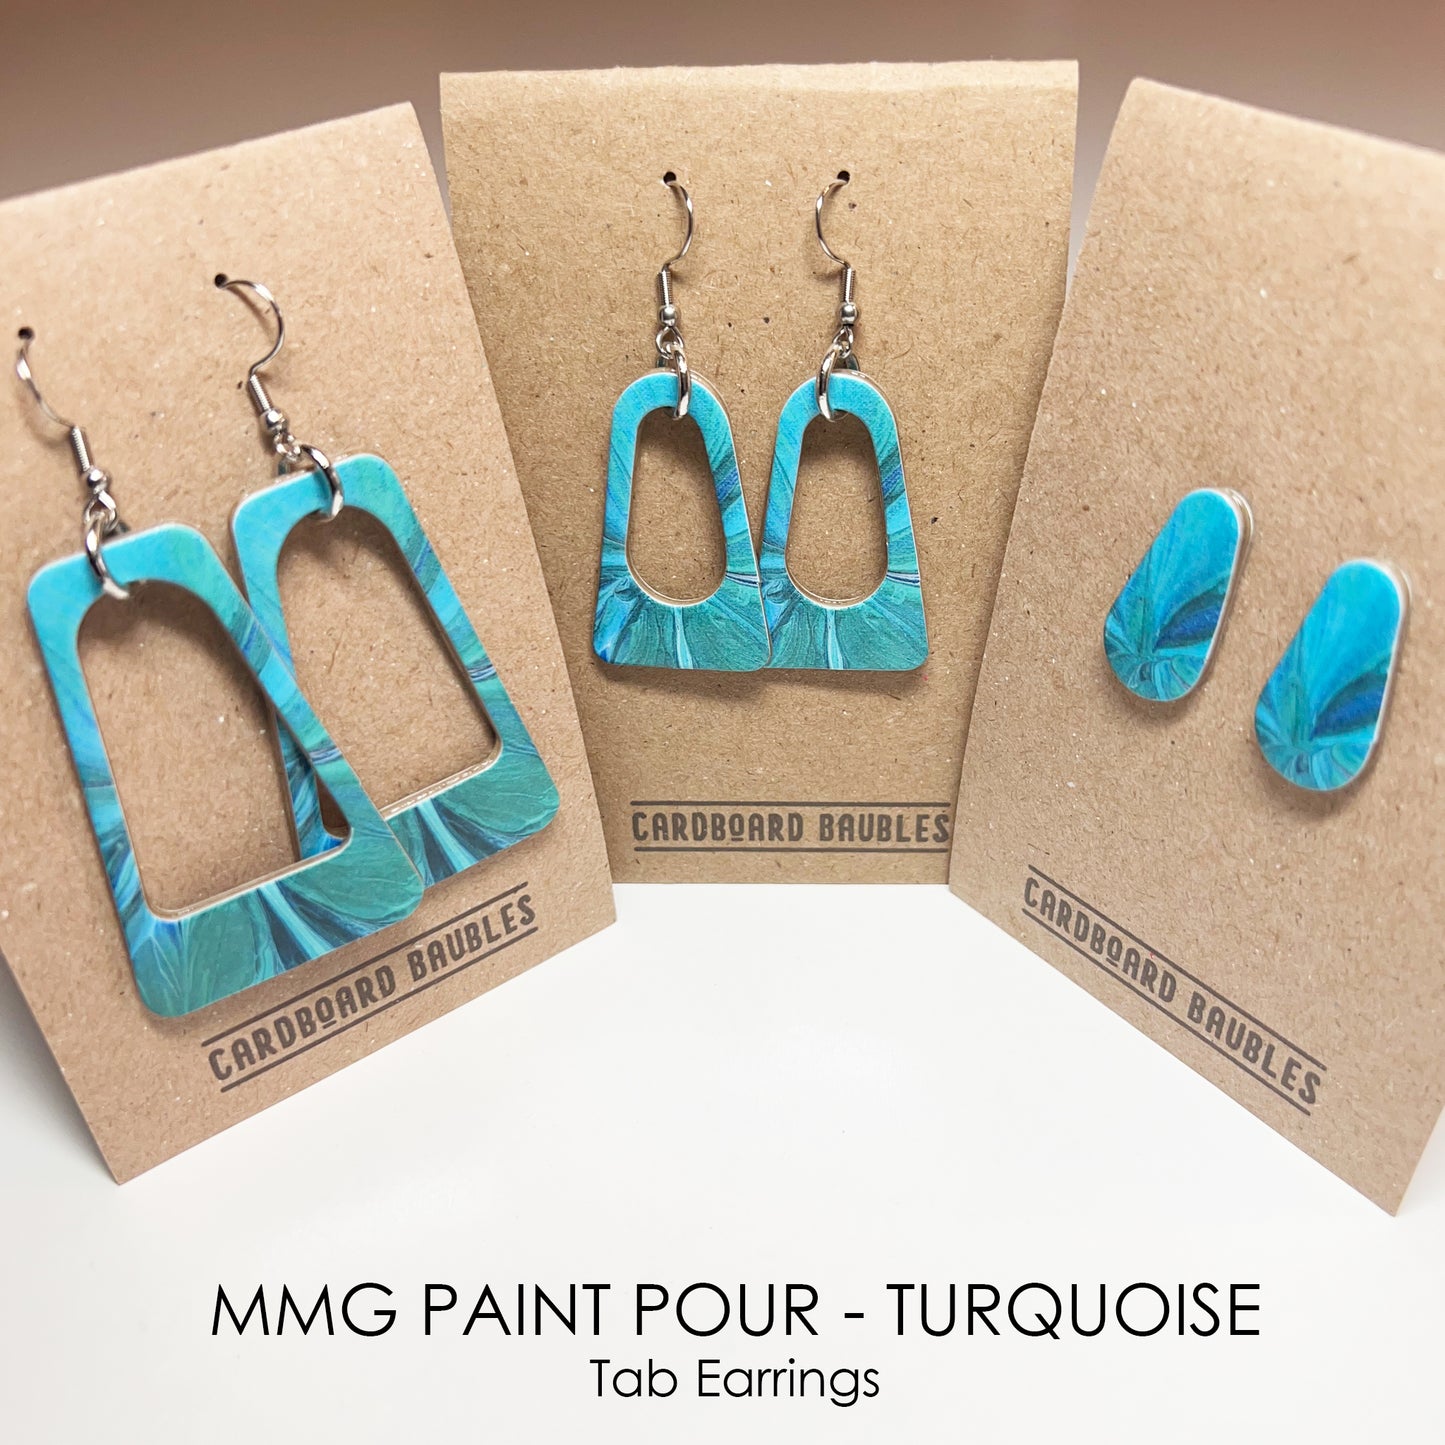 MMG PAINT POUR - TURQUOISE - Tab Cardboard Baubles Earrings